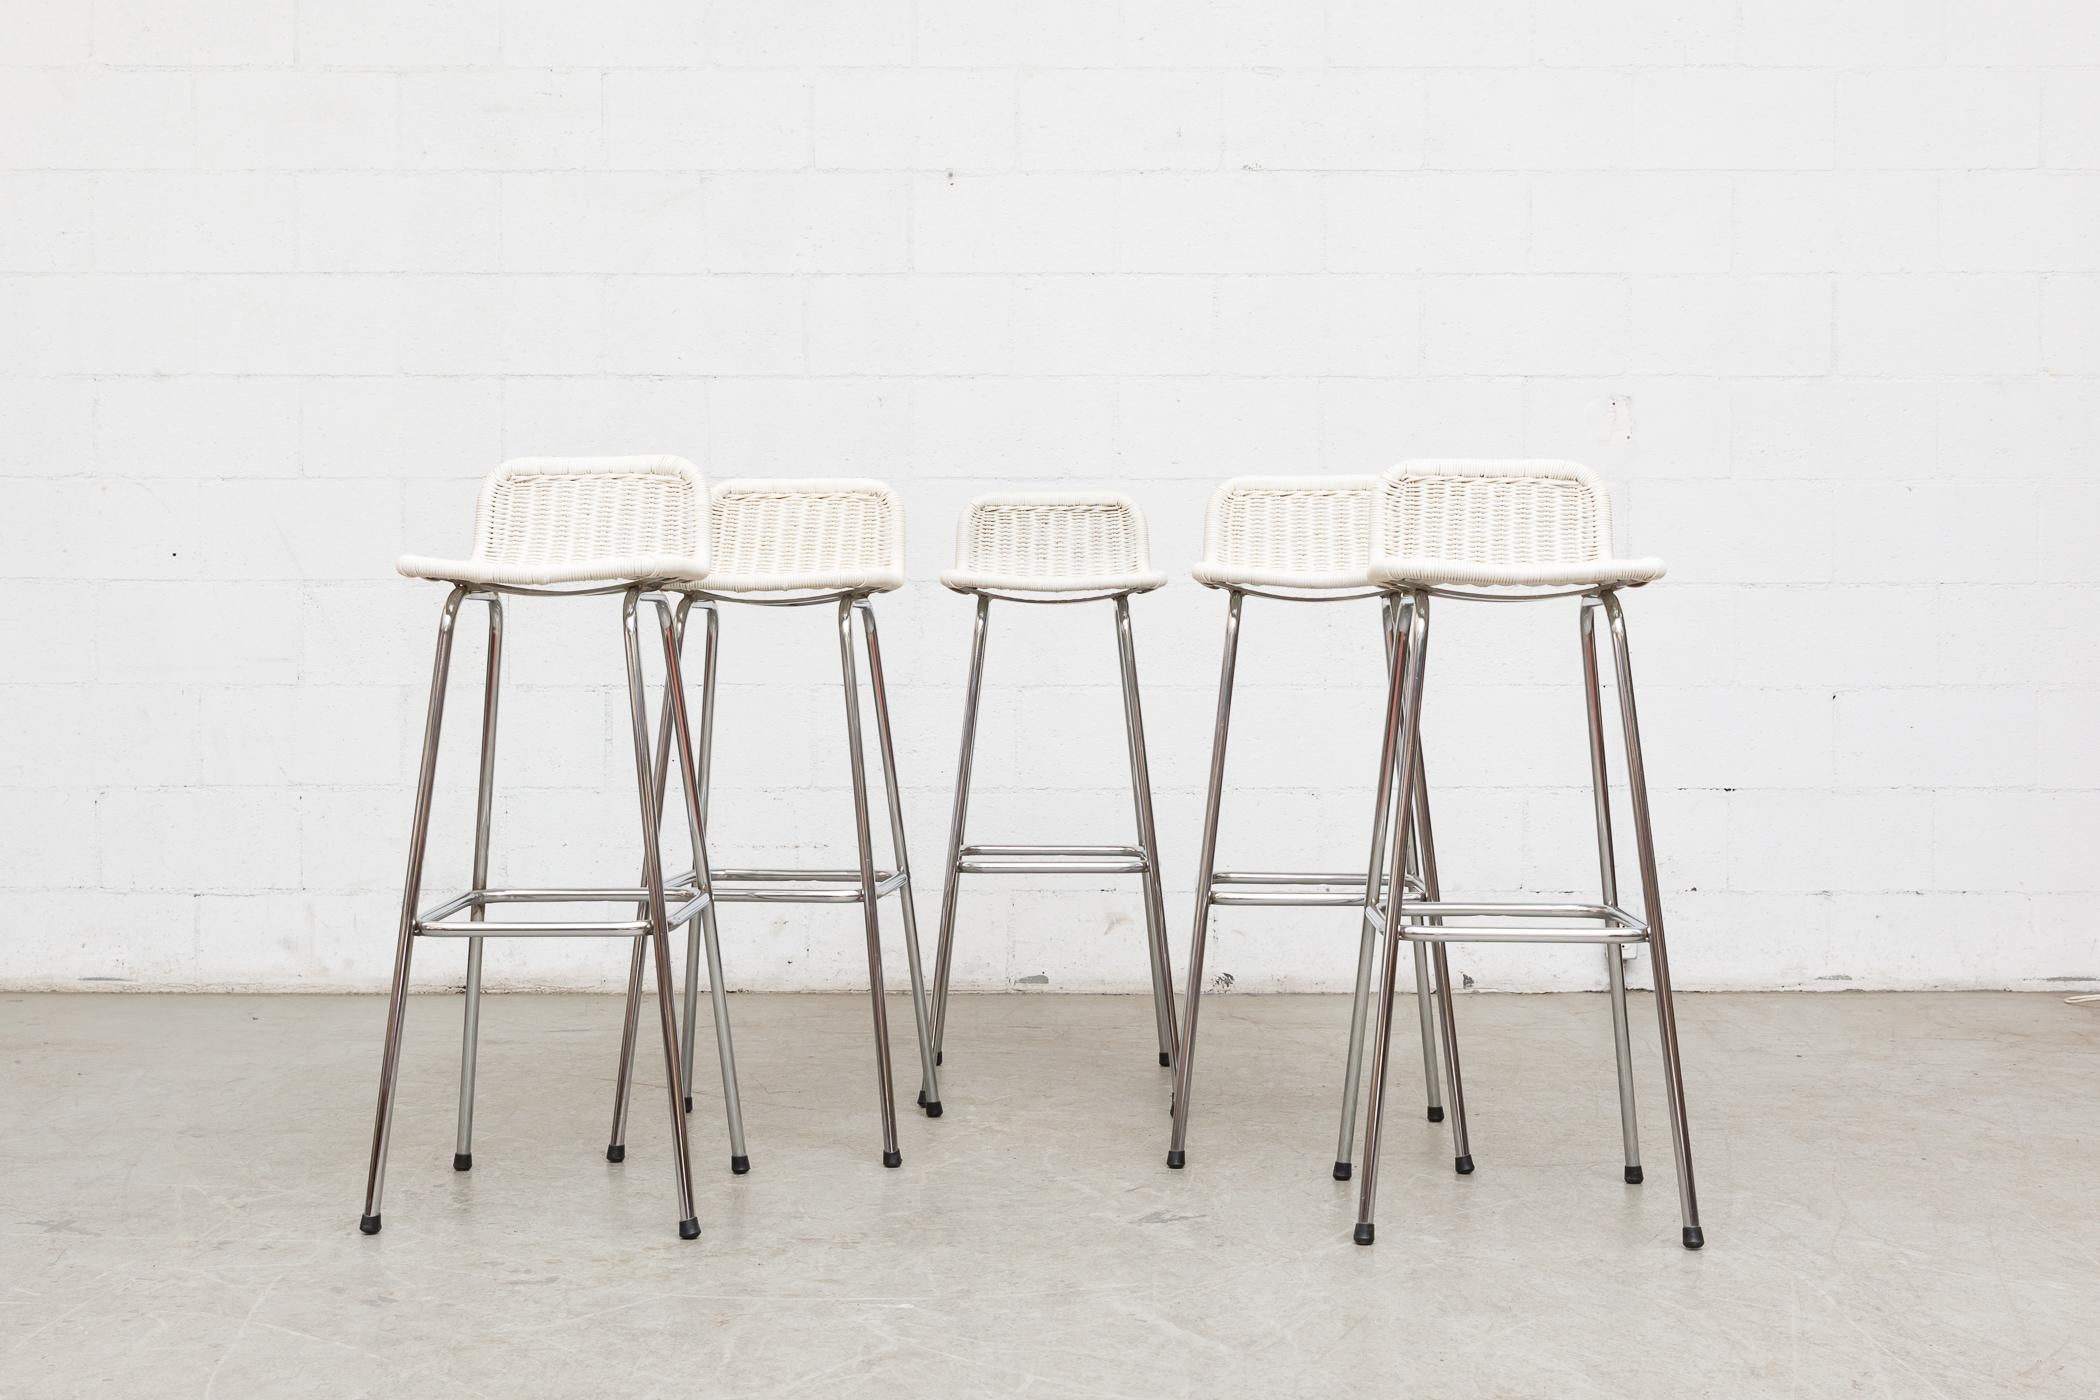 Charlotte Perriand style bar stools. White painted rattan seats on chrome tubular frames. Frames in original condition, seats were over-painted in the 1970s by original owner. Wear Consistent with its age and usage.